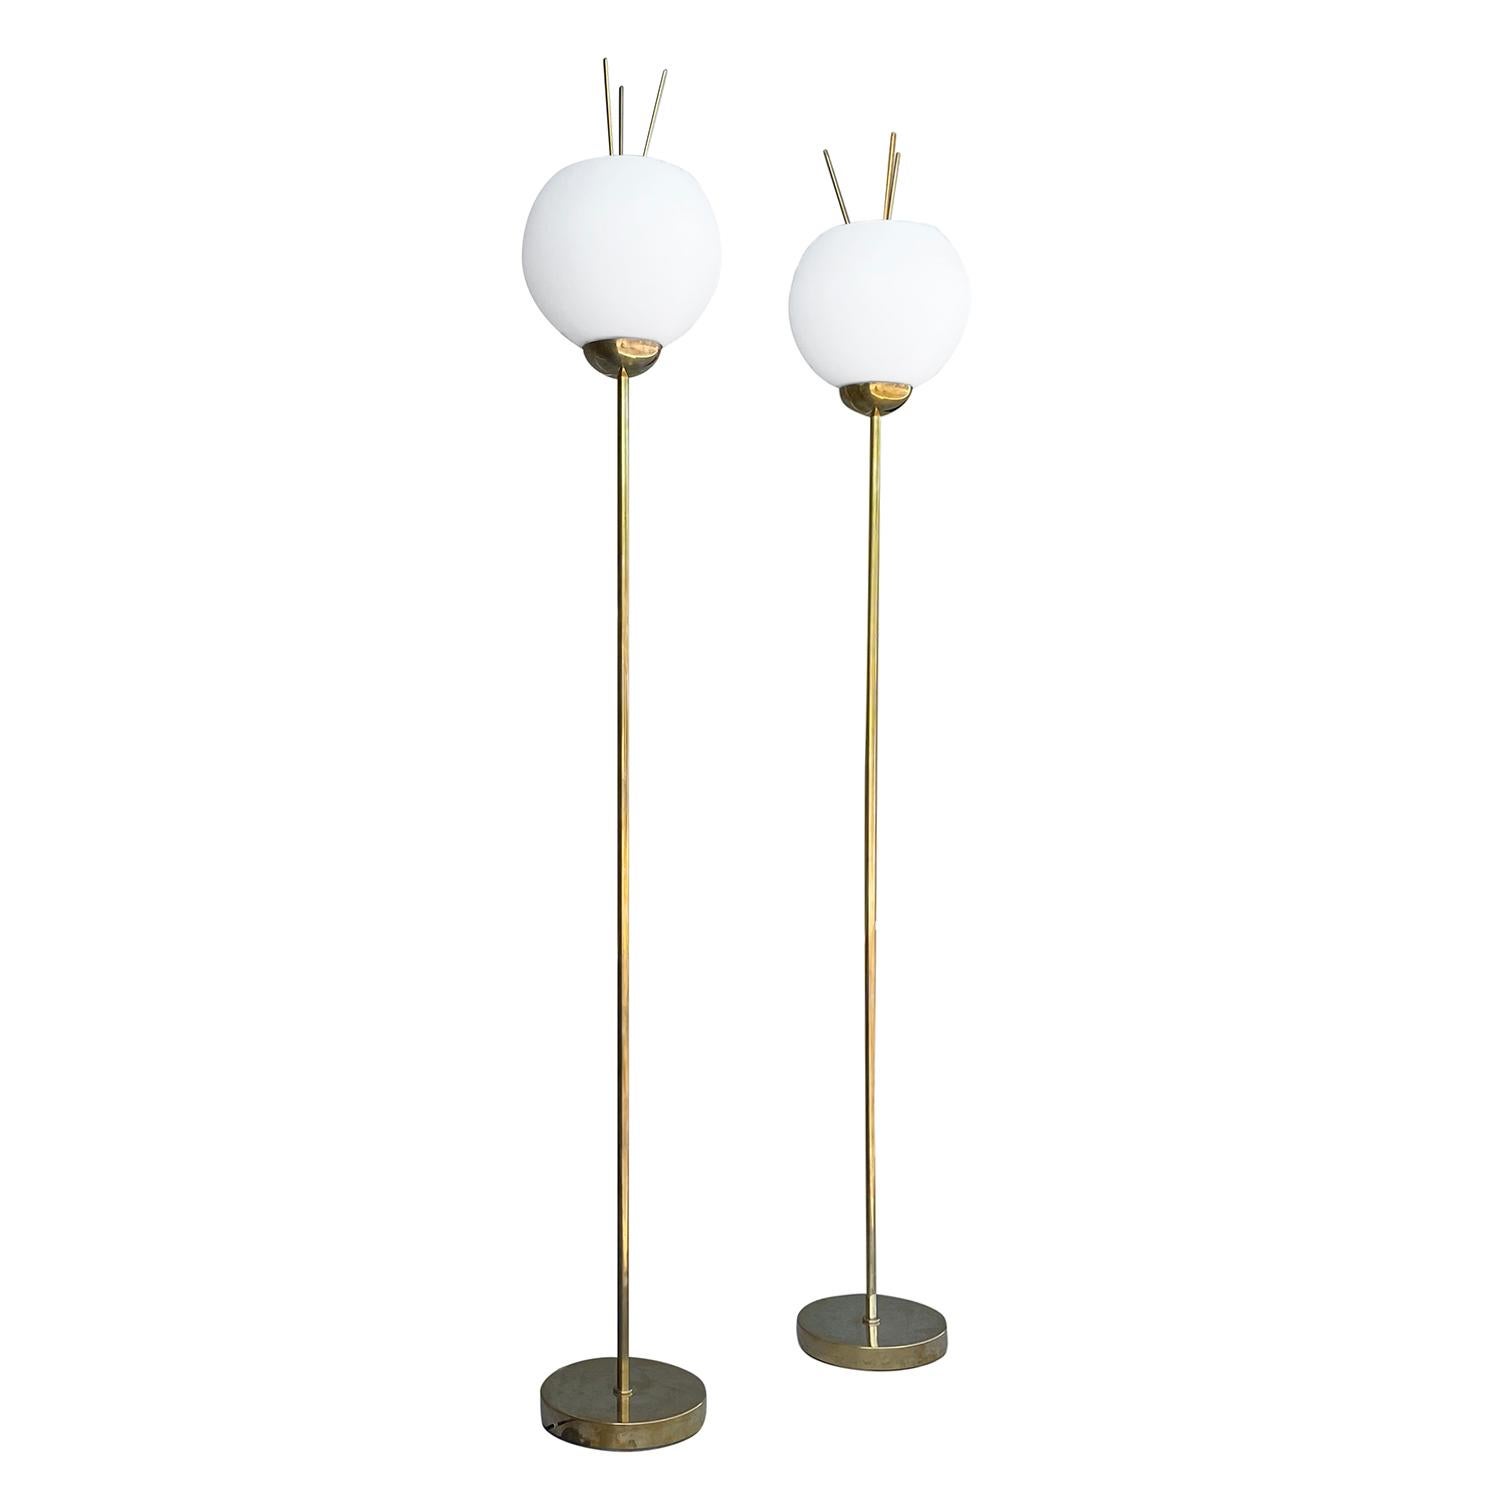 A gold, vintage Mid-Century Modern Italian pair of floor lamps made of hand crafted metal and brass, in good condition. The floor lamps are composed with a round white, frosted opaline glass shade, detailed with three feelers, featuring a one light